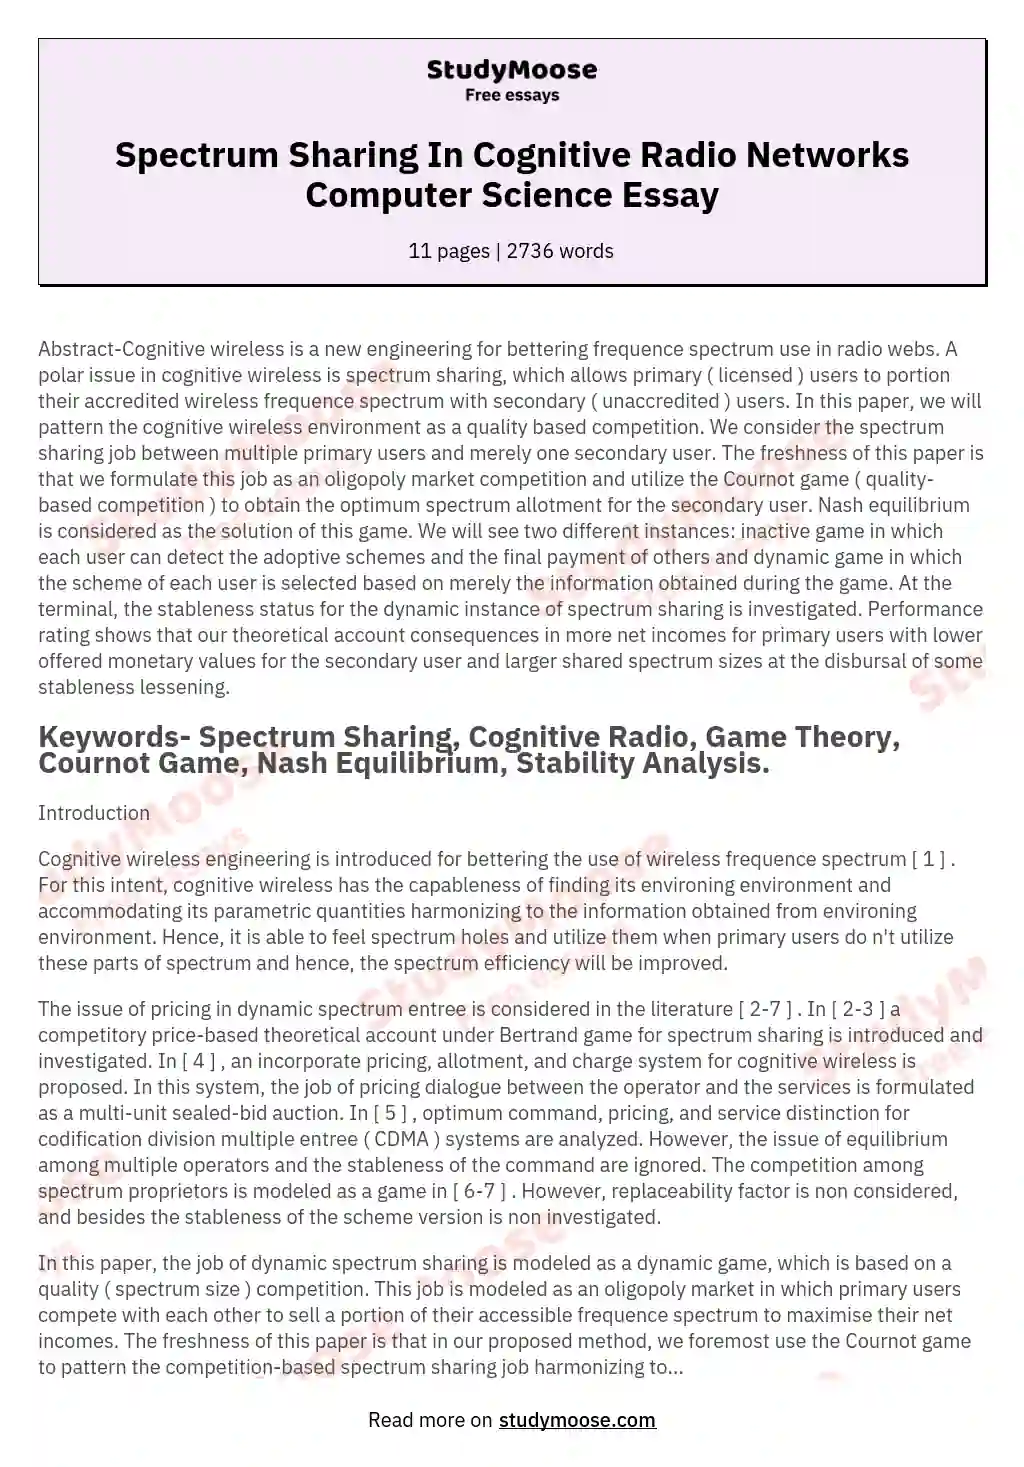 Spectrum Sharing In Cognitive Radio Networks Computer Science Essay